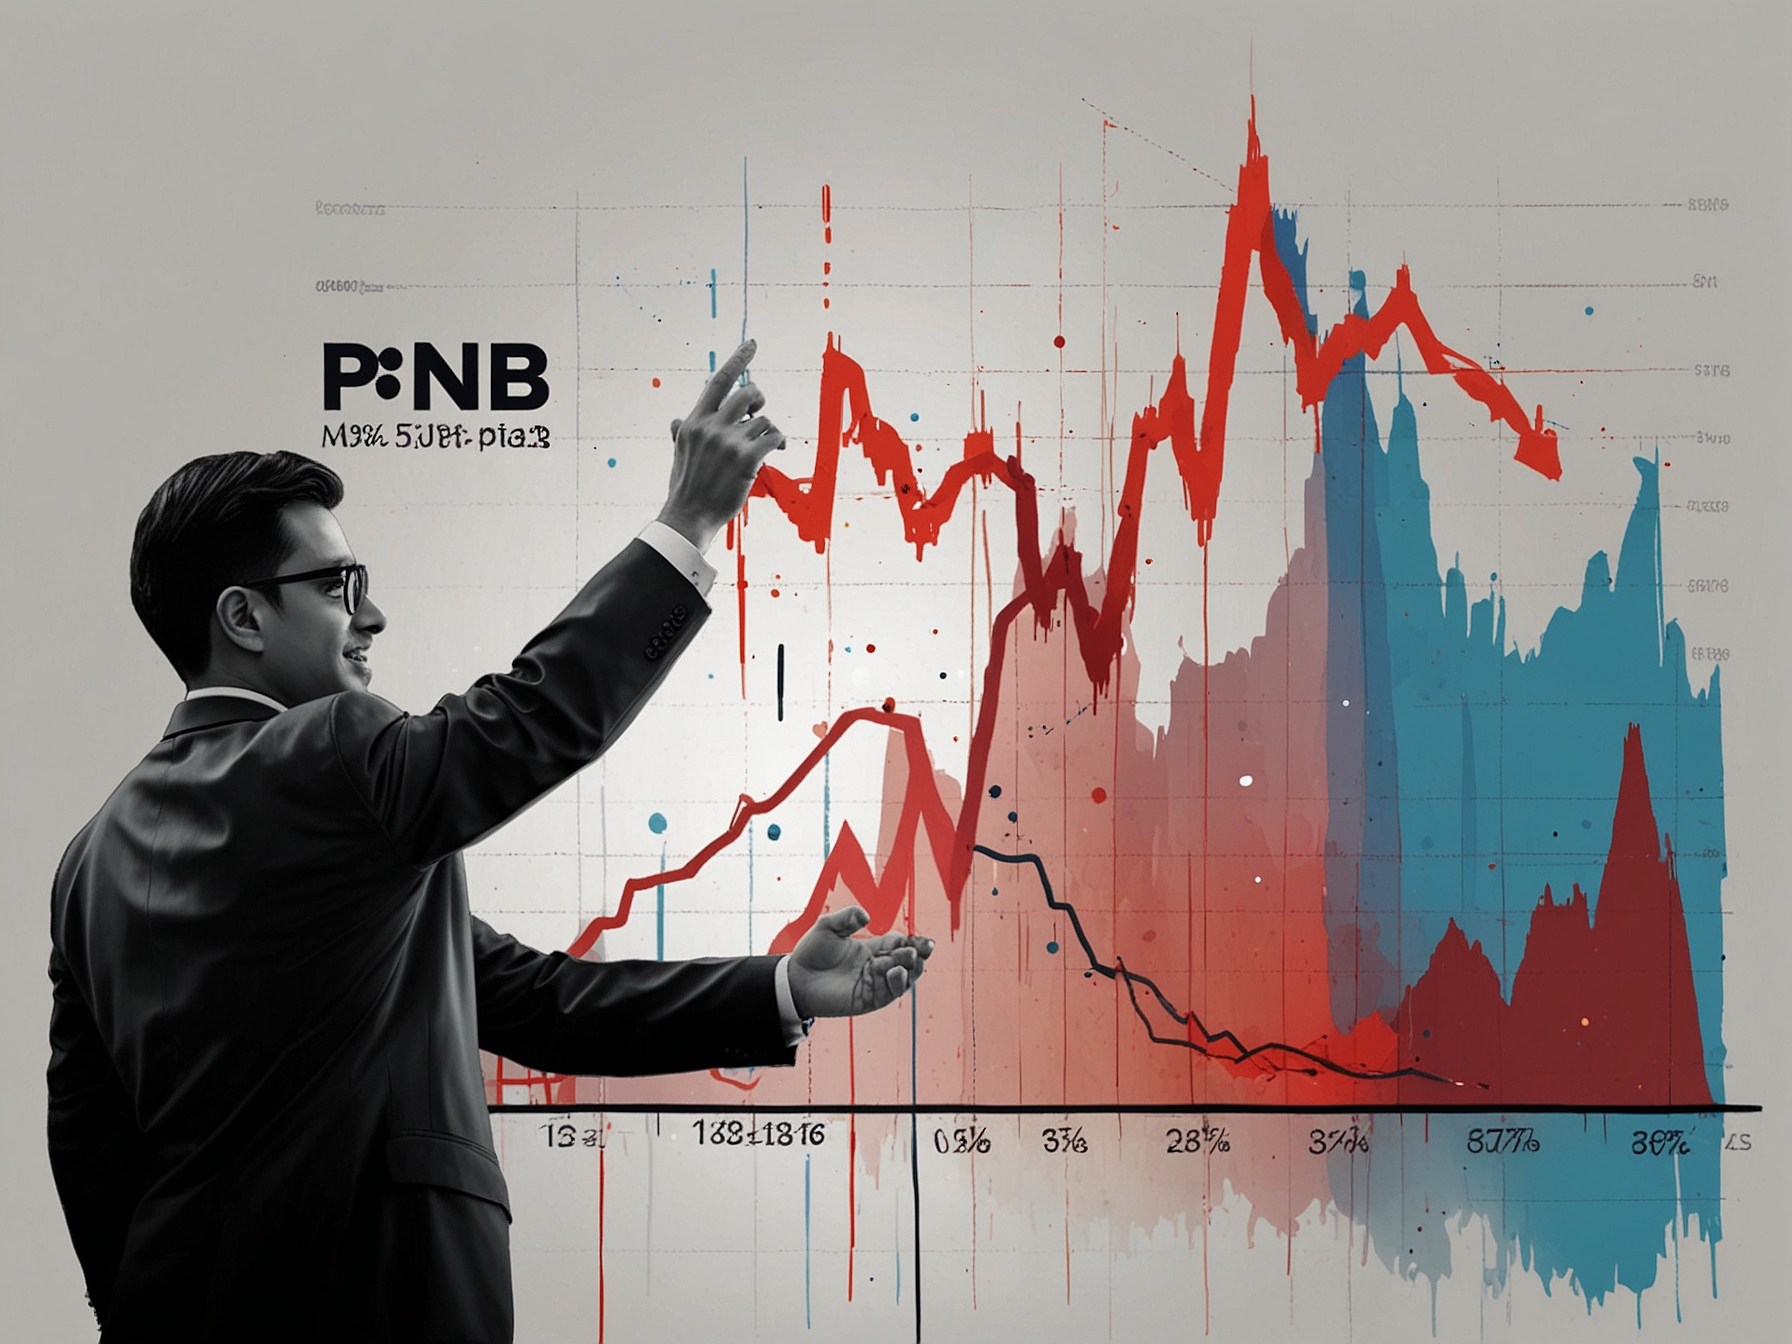 A graph illustrating PNB's share price surge with key data points such as the 1.86% increase, closing price of ₹126.55, and later trading price of ₹128.9.